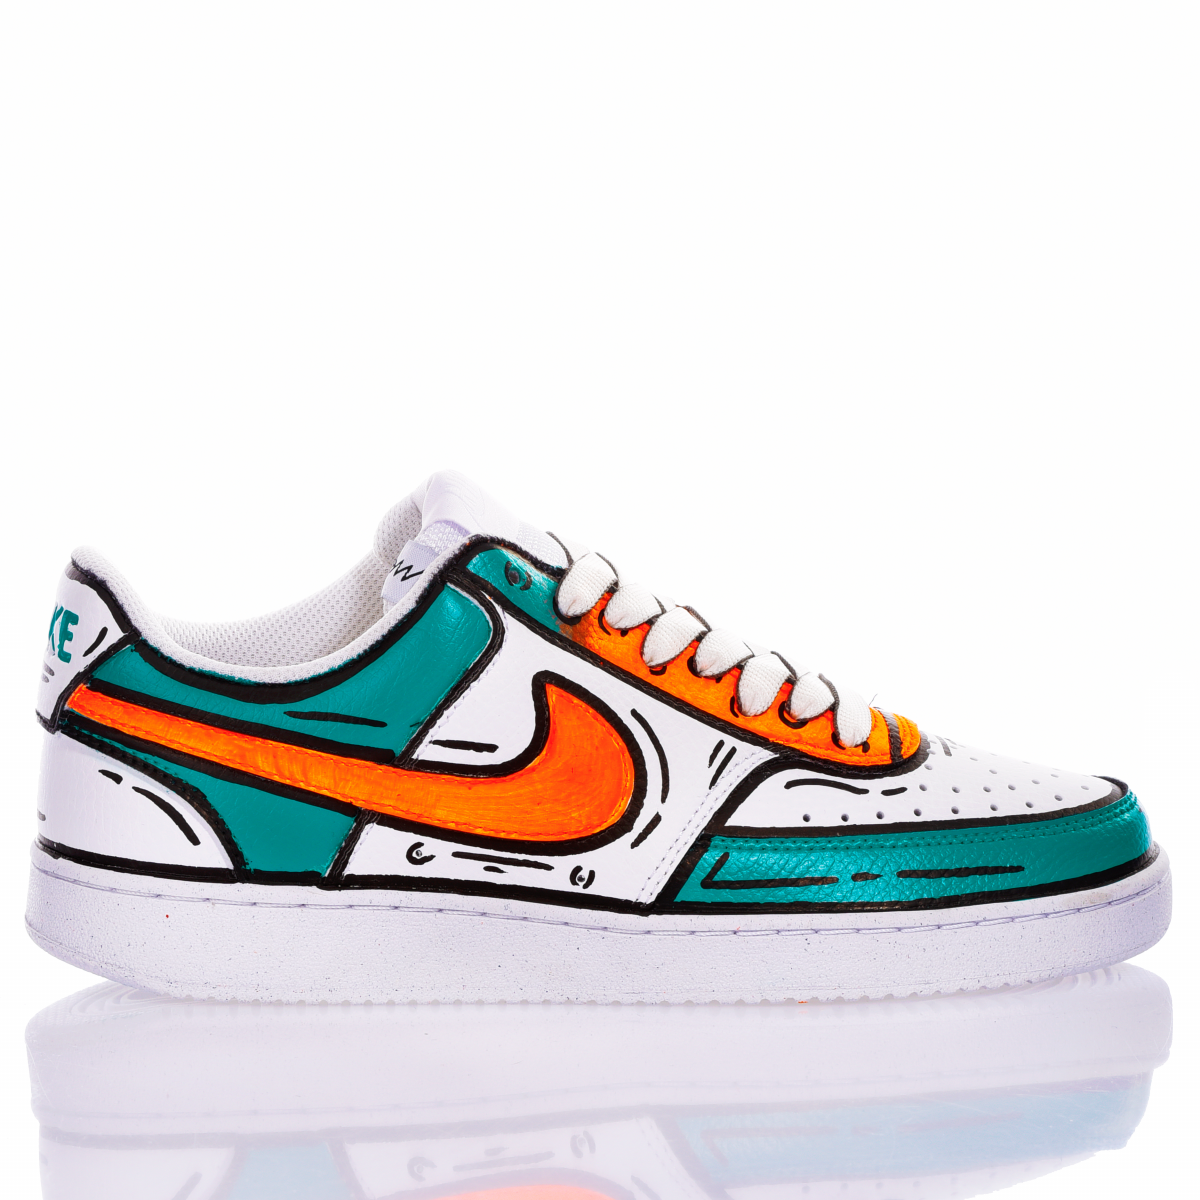 Nike Comics Ottanio Air force vision Special